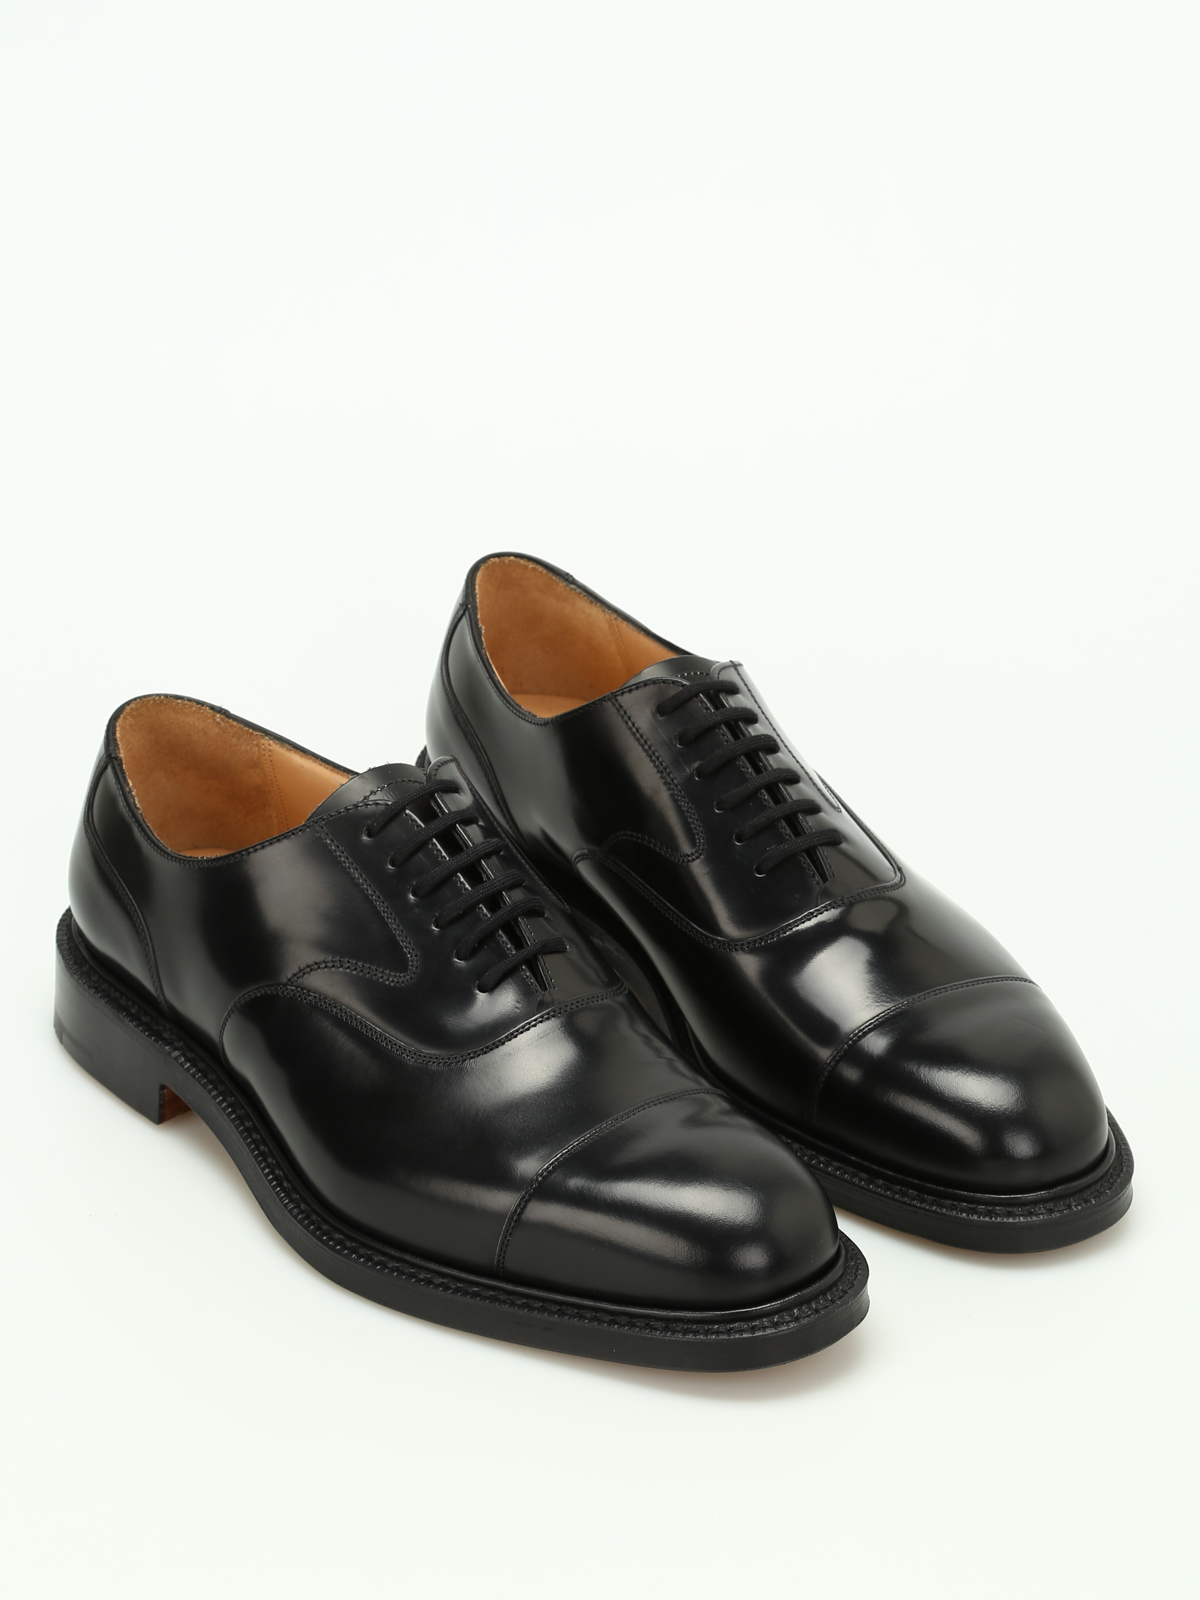 Classic shoes Church's - Lancaster polished binder shoes -  LANCASTER173EEB0109XVF0AAB